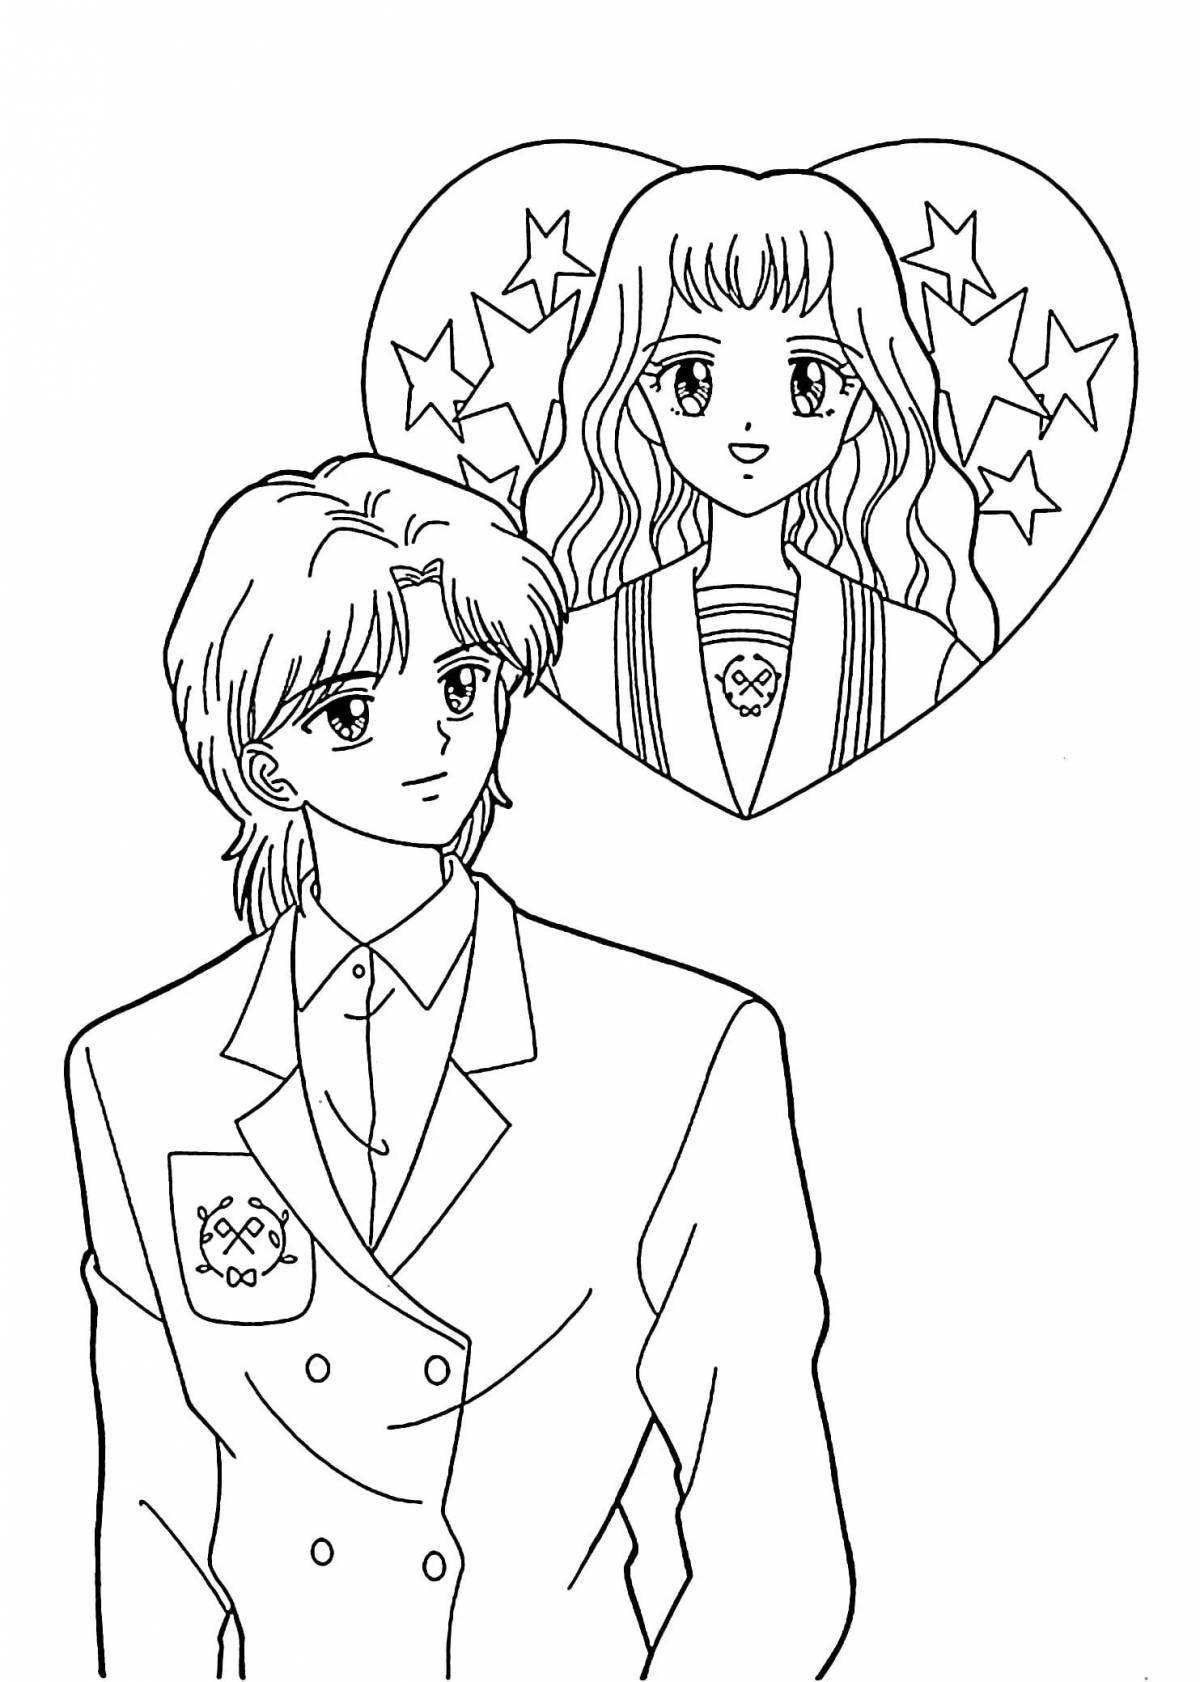 Awesome anime boys and girls coloring pages